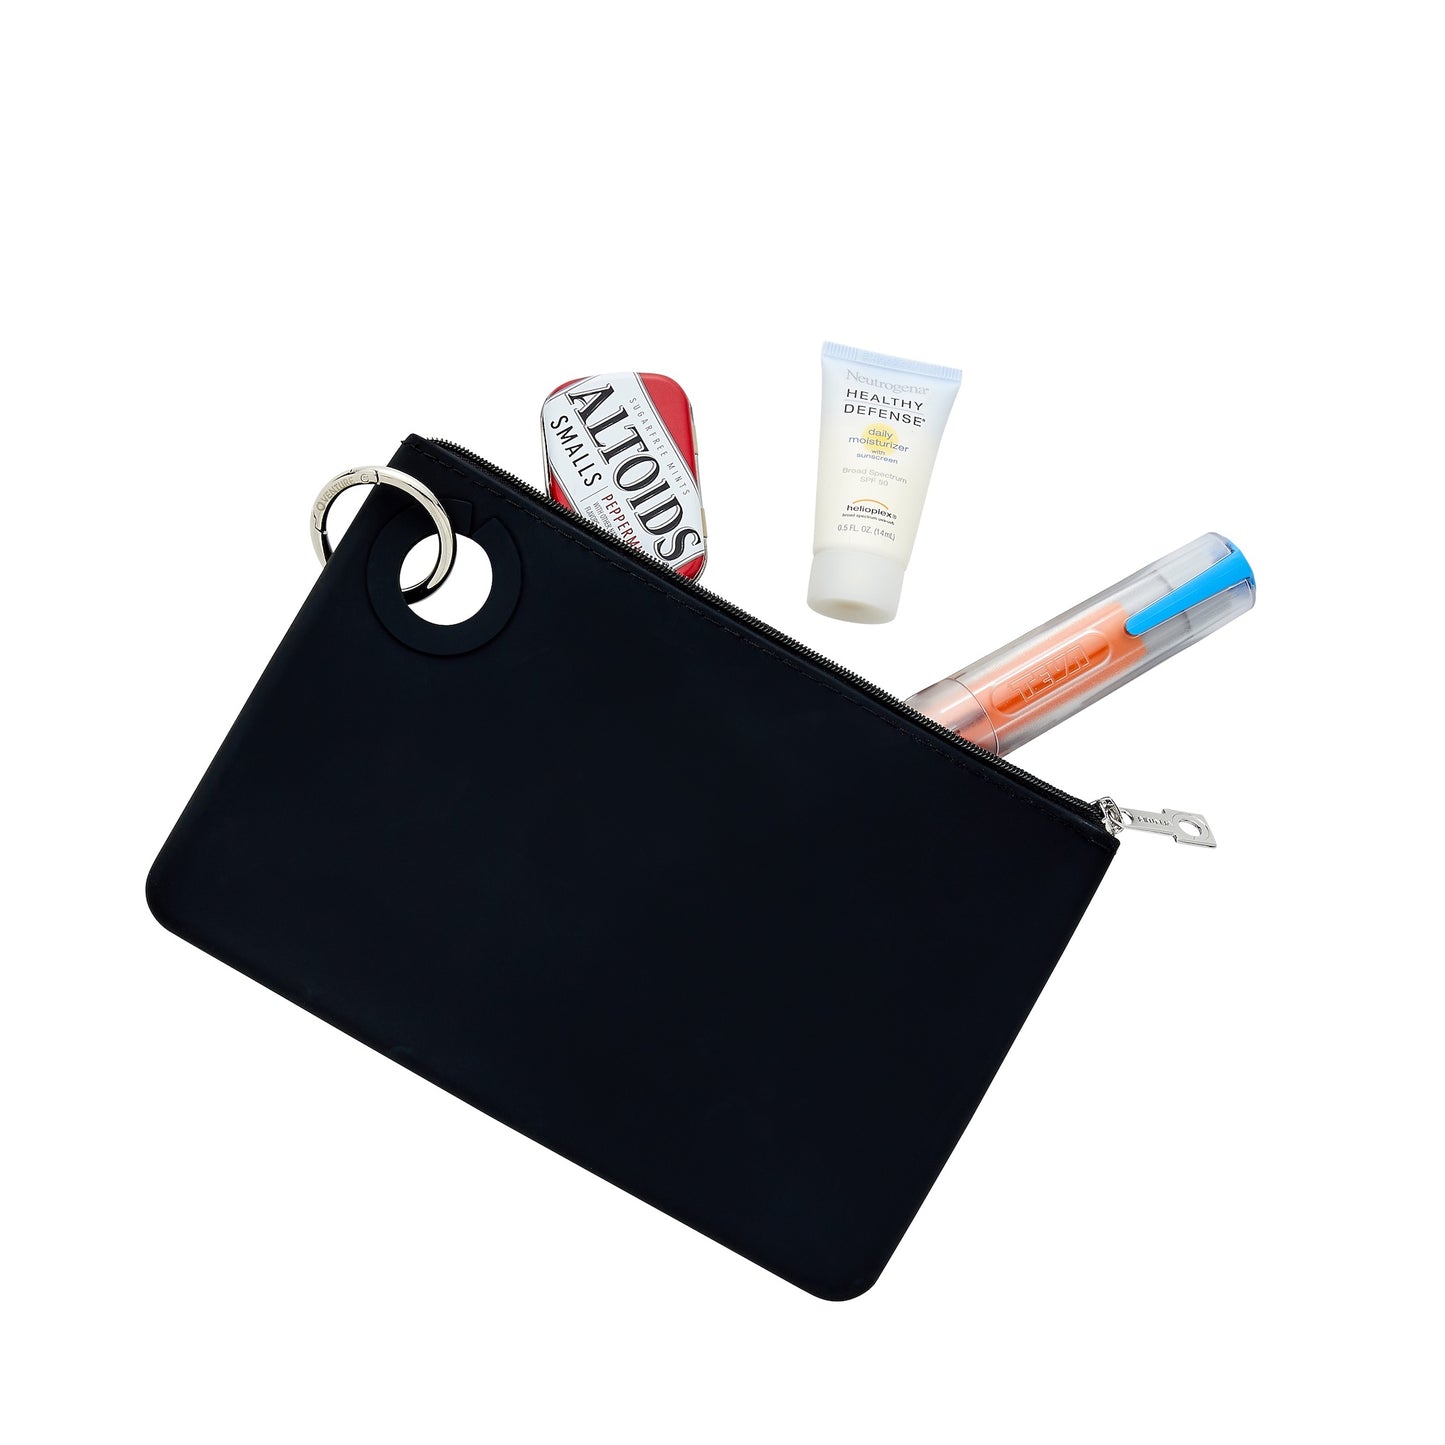 Stylish Large Pouch Wristlet with Phone Holder in black.